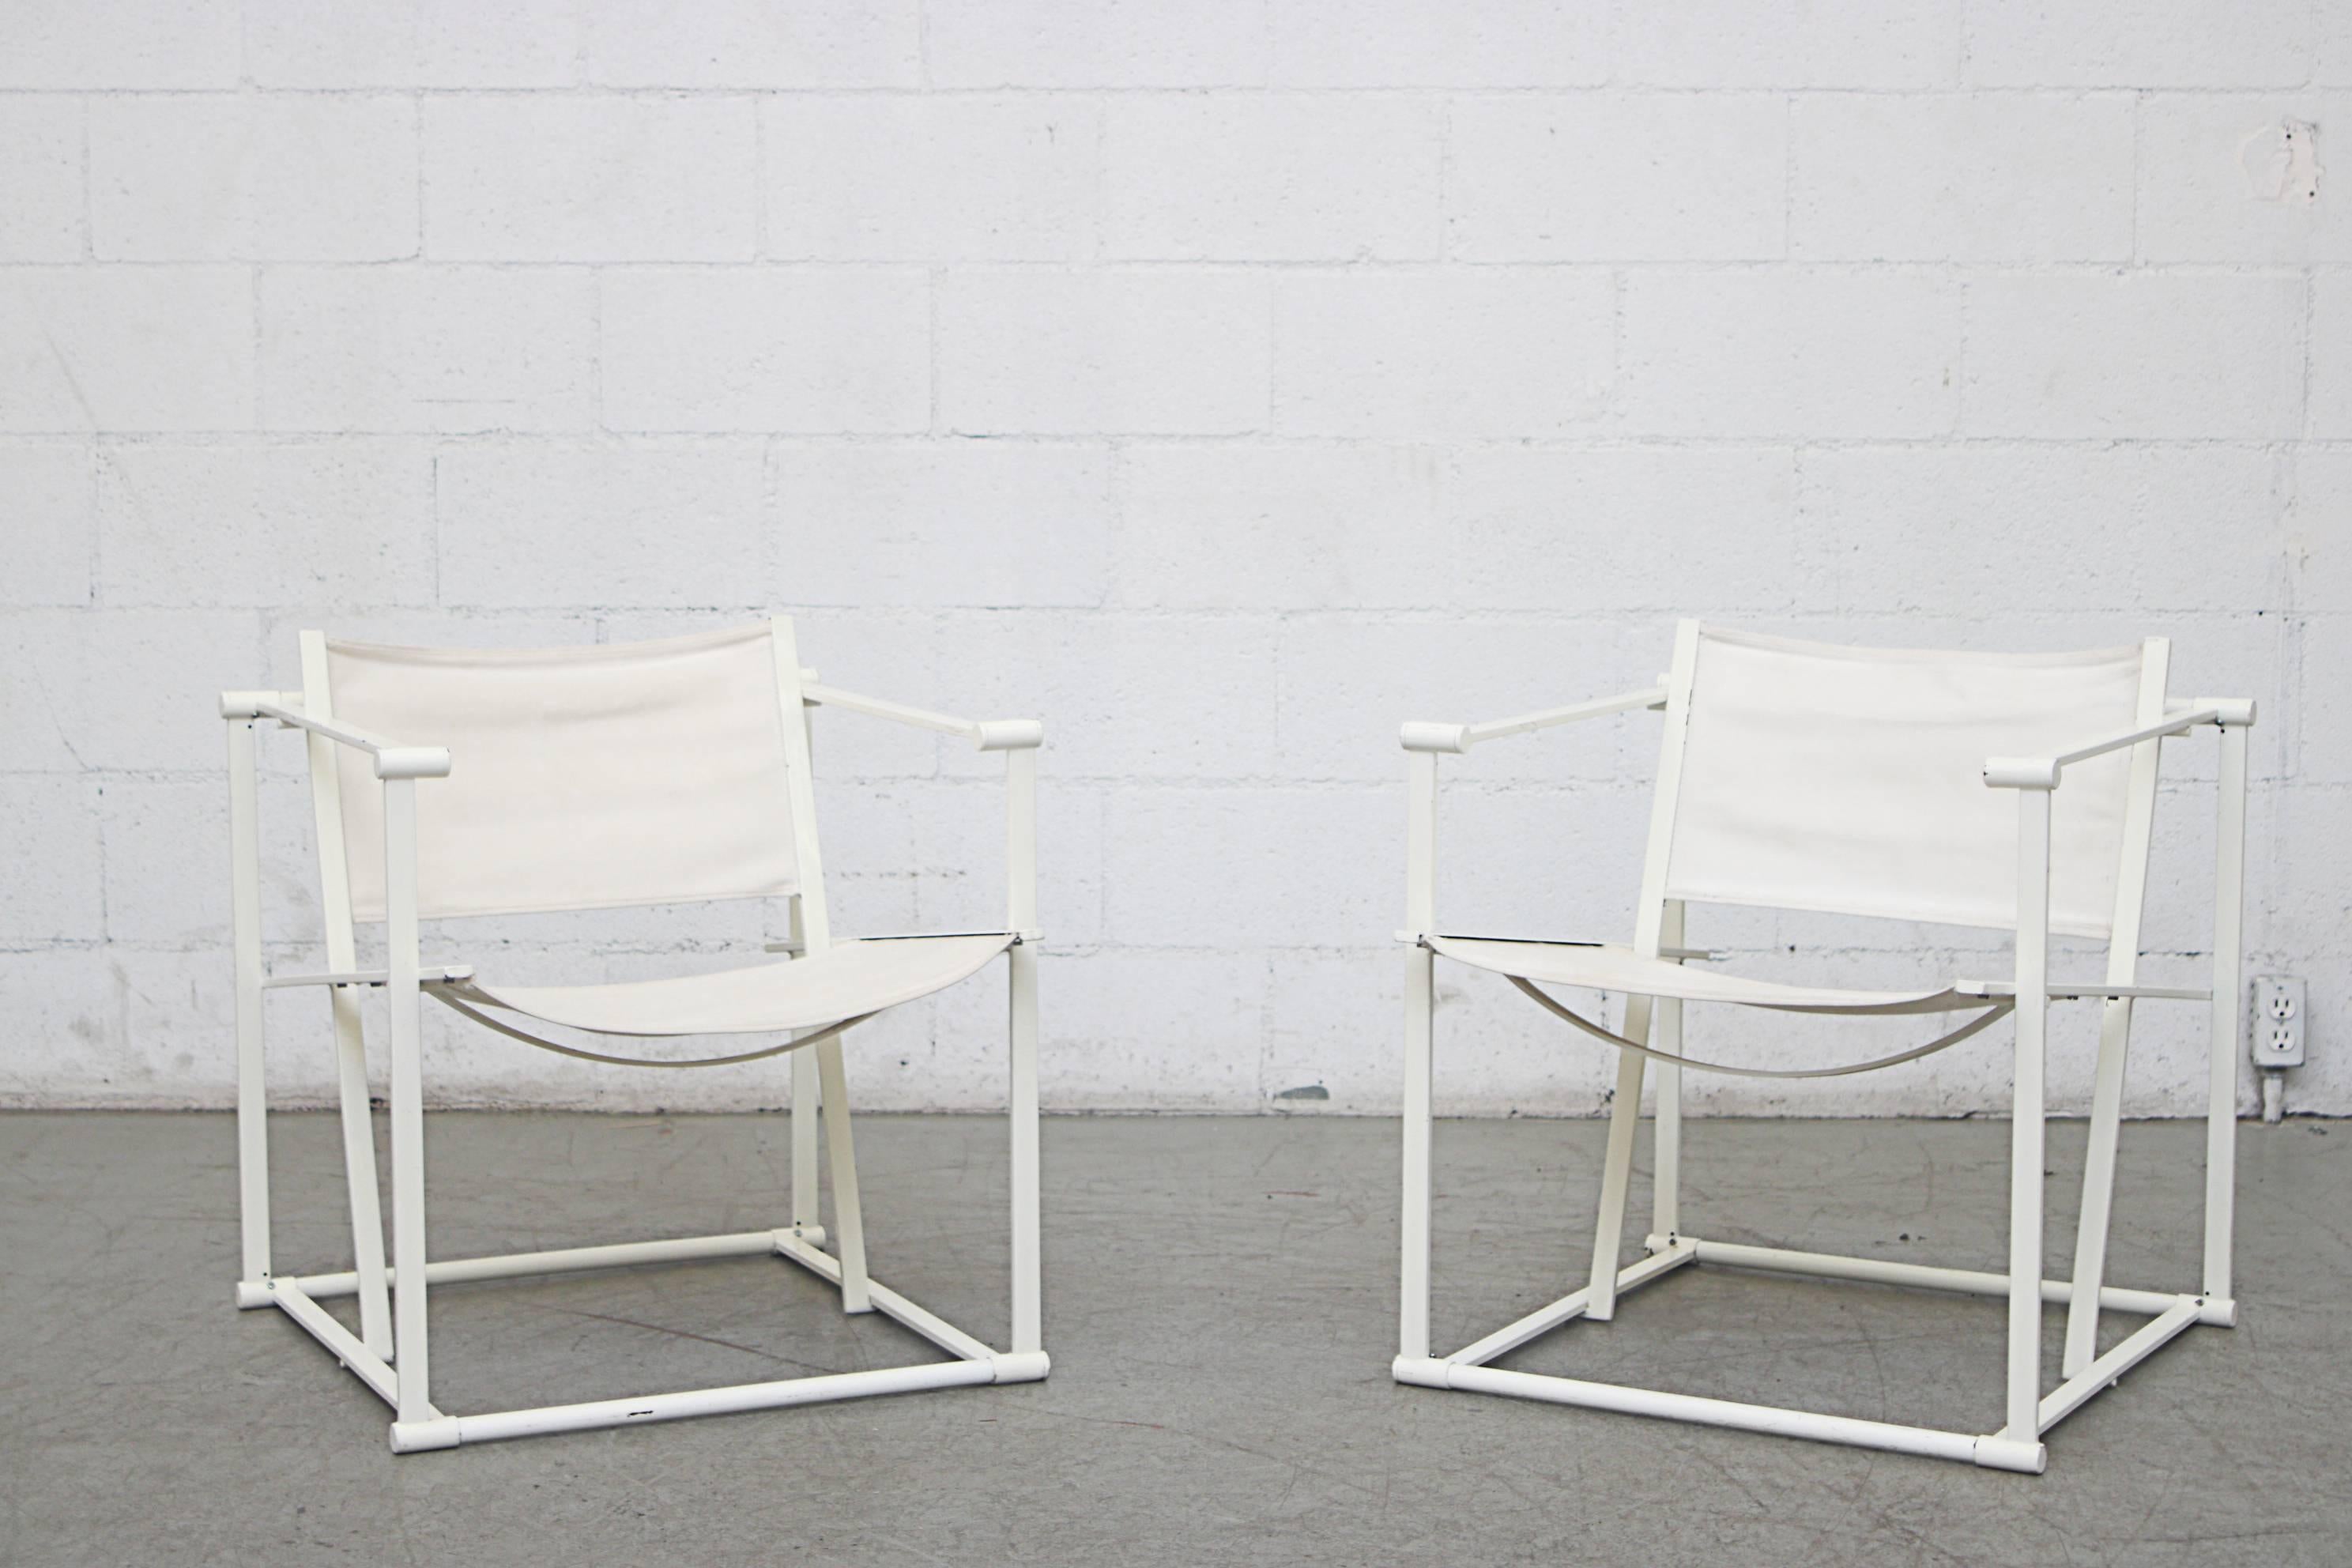 UMS Pastoe FM60, Cubic chair lounge chair, designed in 1980 by Radboud van Beekum. White enameled steel frame with original worn white-ish canvas seating. Visible wear with some fraying and fading of canvas. Frame are in original condition with